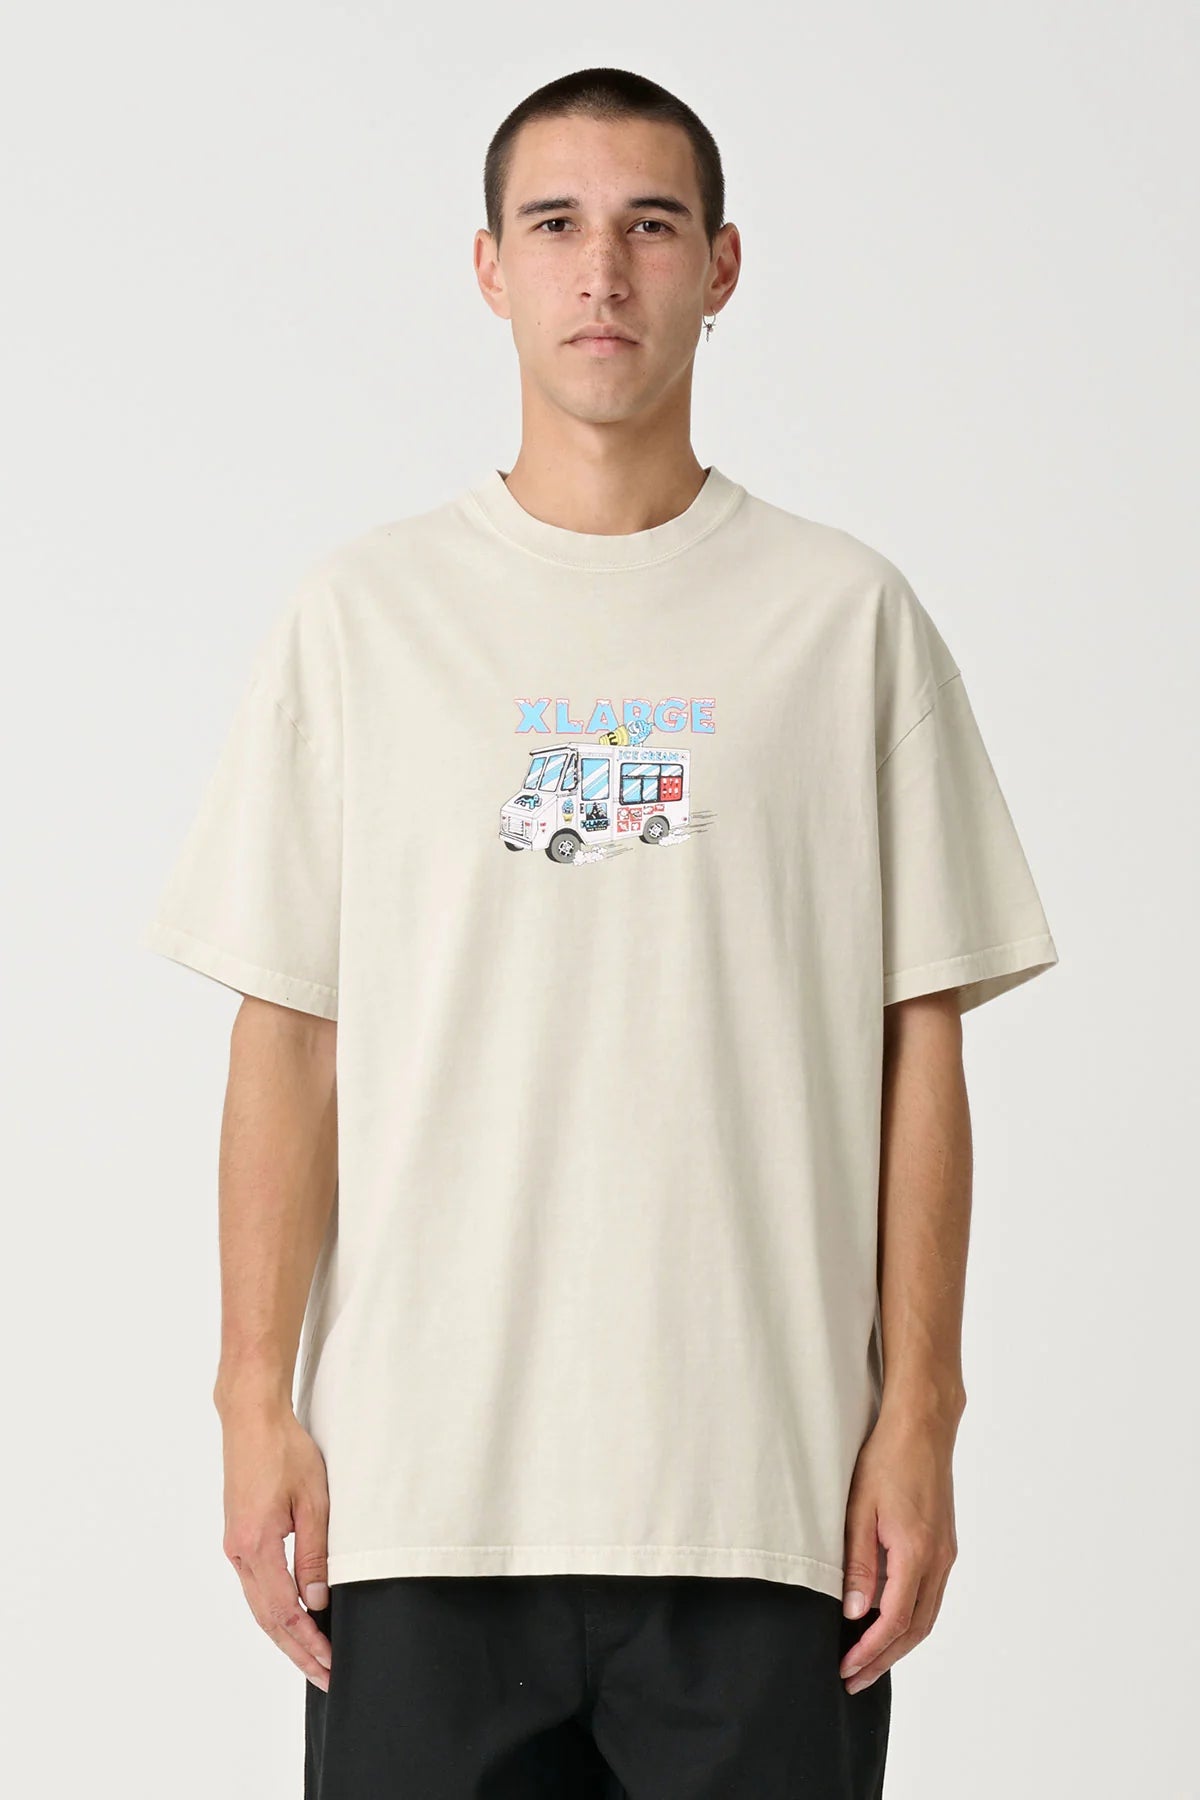 XLARGE Whippy Mens Tee - Pigment White